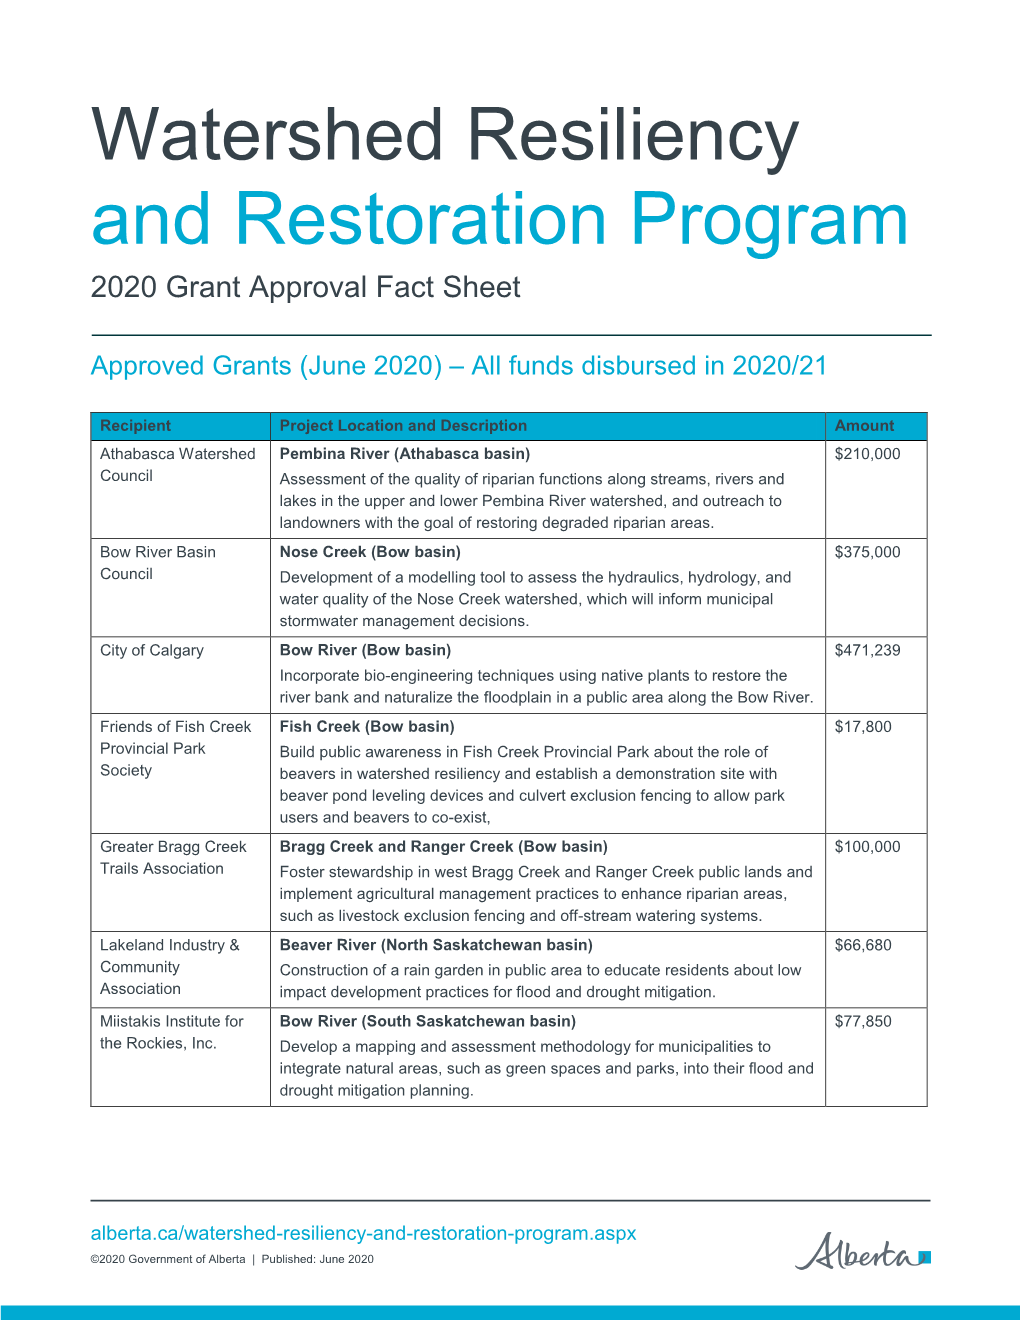 Watershed Resiliency and Restoration Program 2020 Grant Approval Fact Sheet